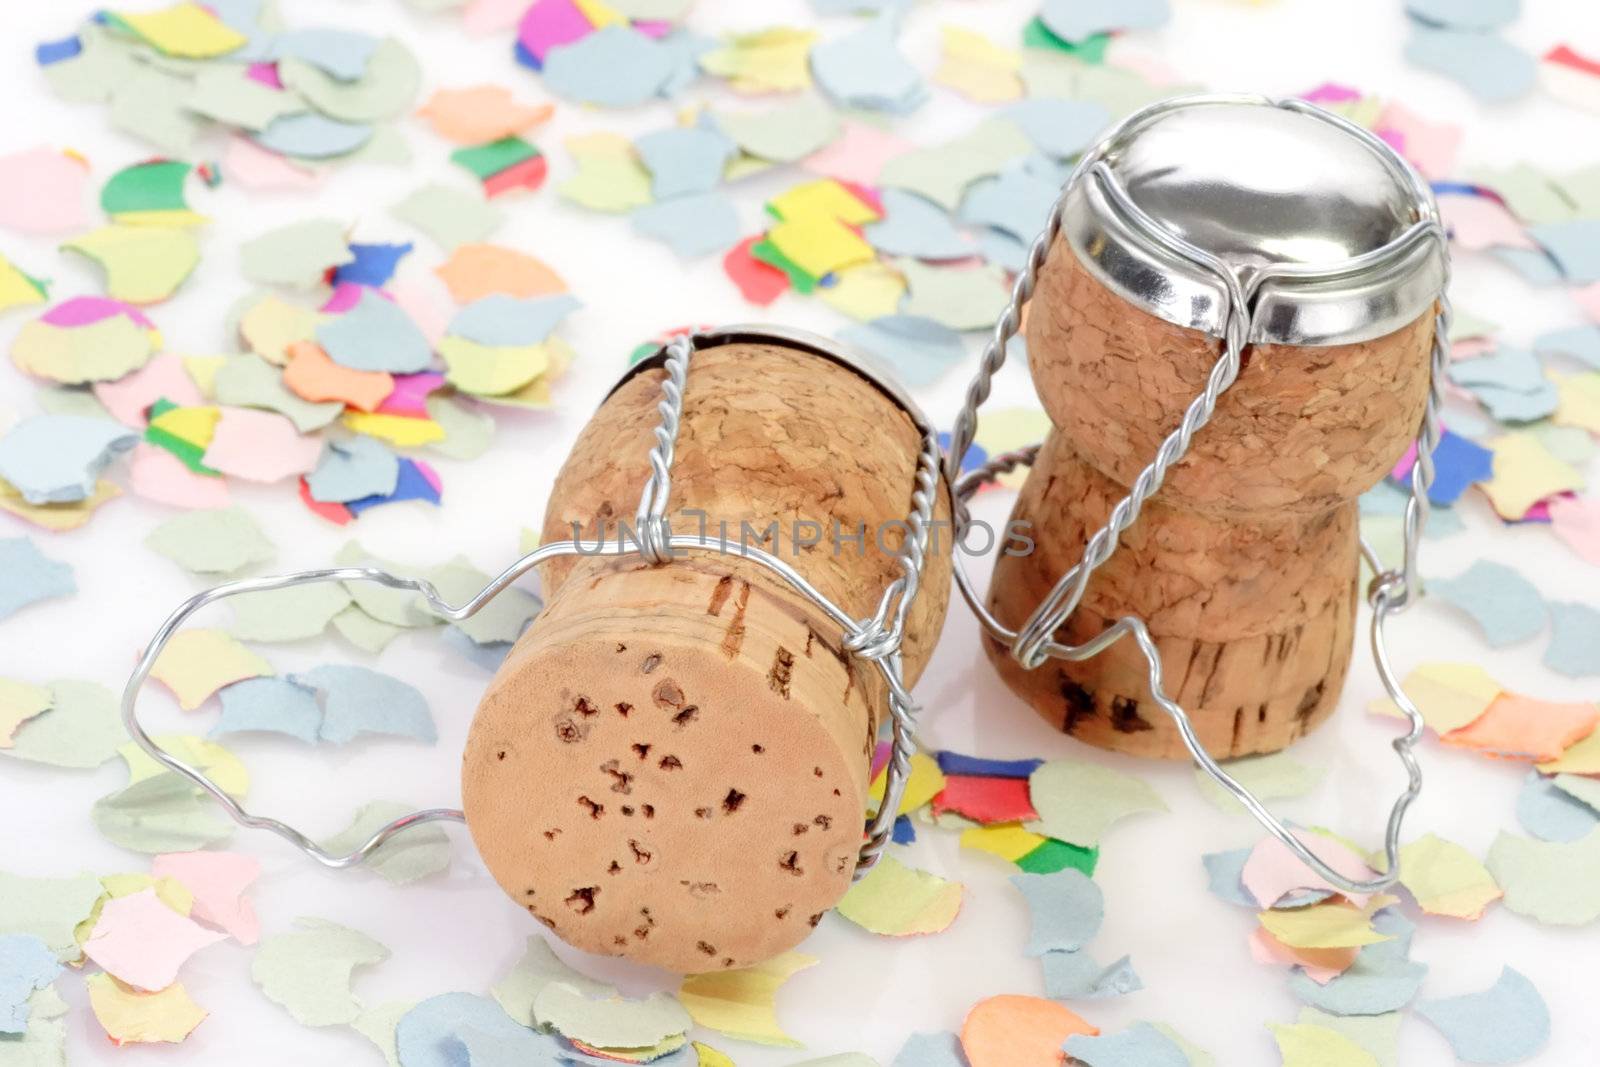 Champagne Corks with Confetti by Teamarbeit